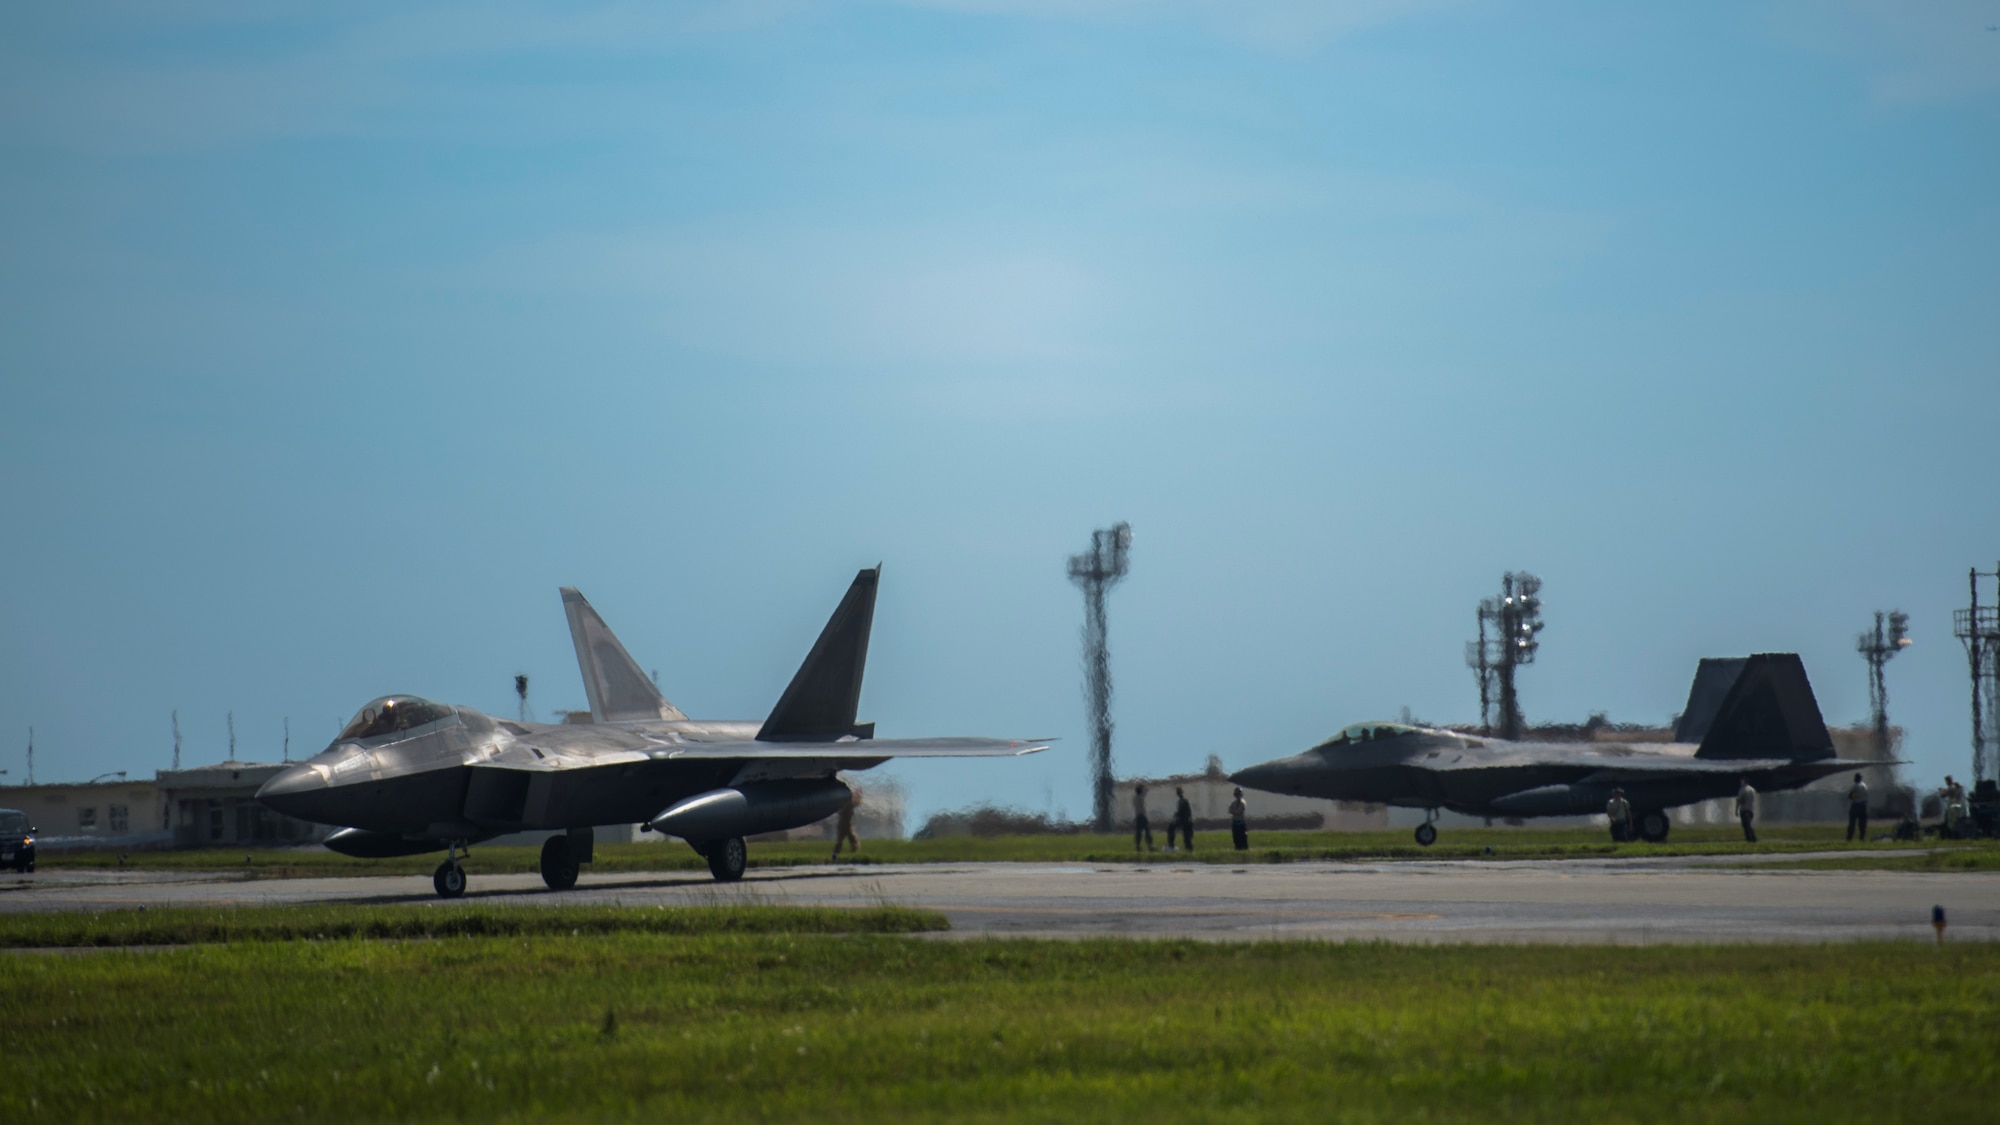 U.S. Air Force F-22 Raptors assigned to 525th Fighter Squadron from Joint Base Elmendorf-Richardson taxis at Kadena Air Base, Japan, May 29, 2018 (HST).